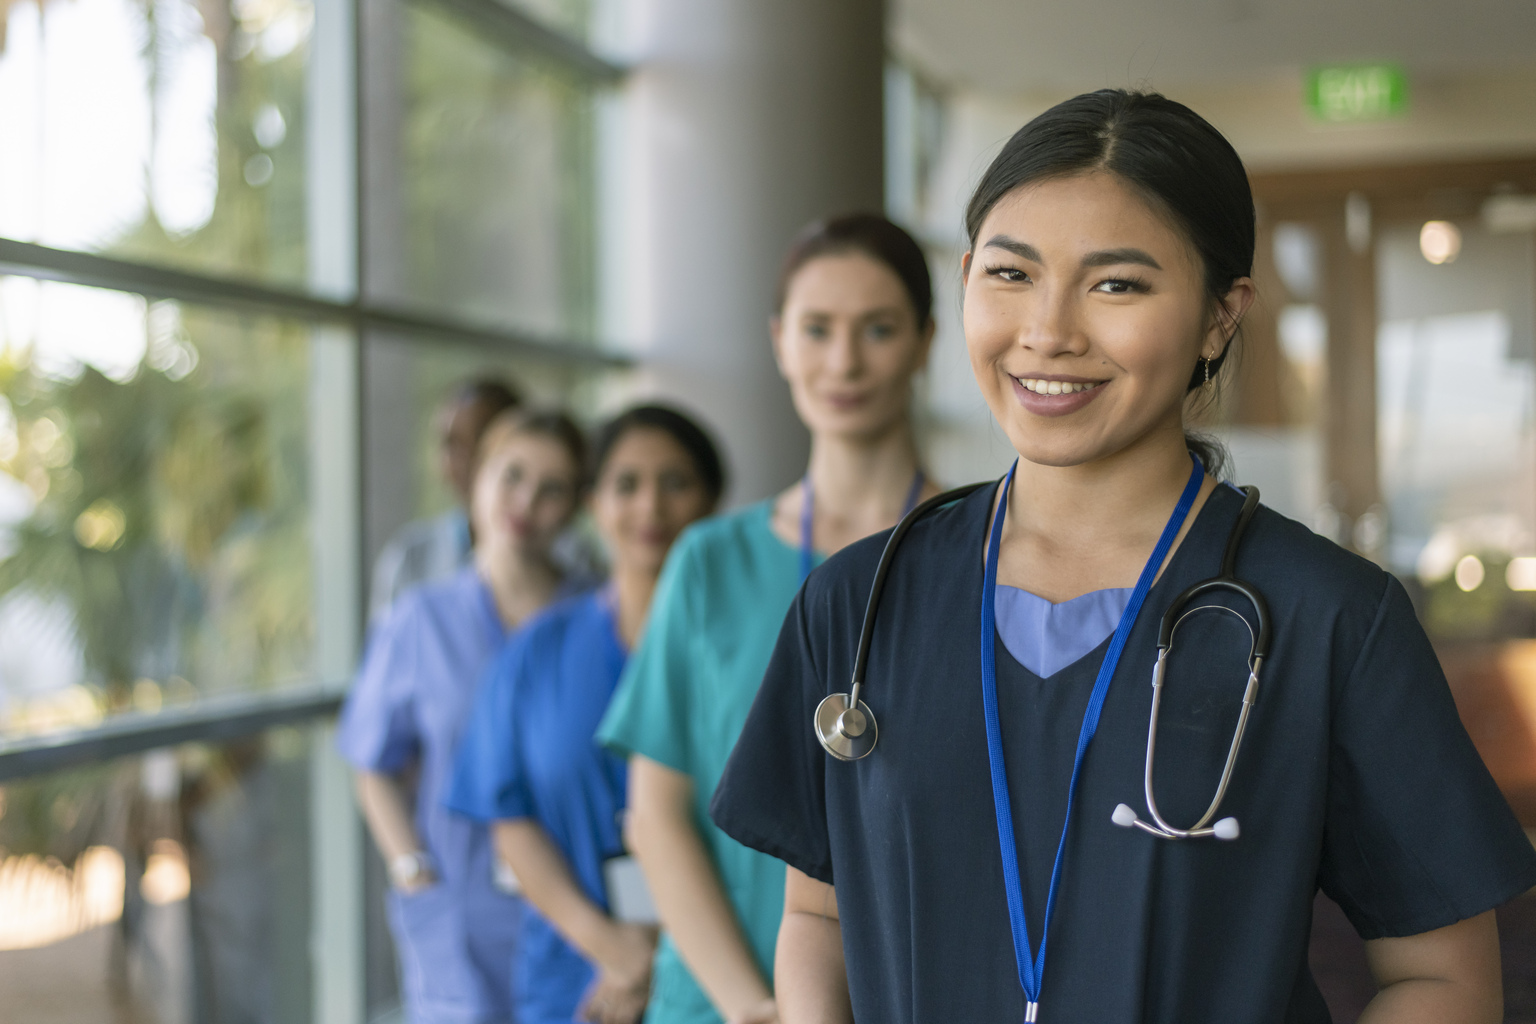 A female doctor of Asian descent poses with her multi-ethnic team of doctors and nurses and smiles directly at the camera while standing in a hospital corridor.